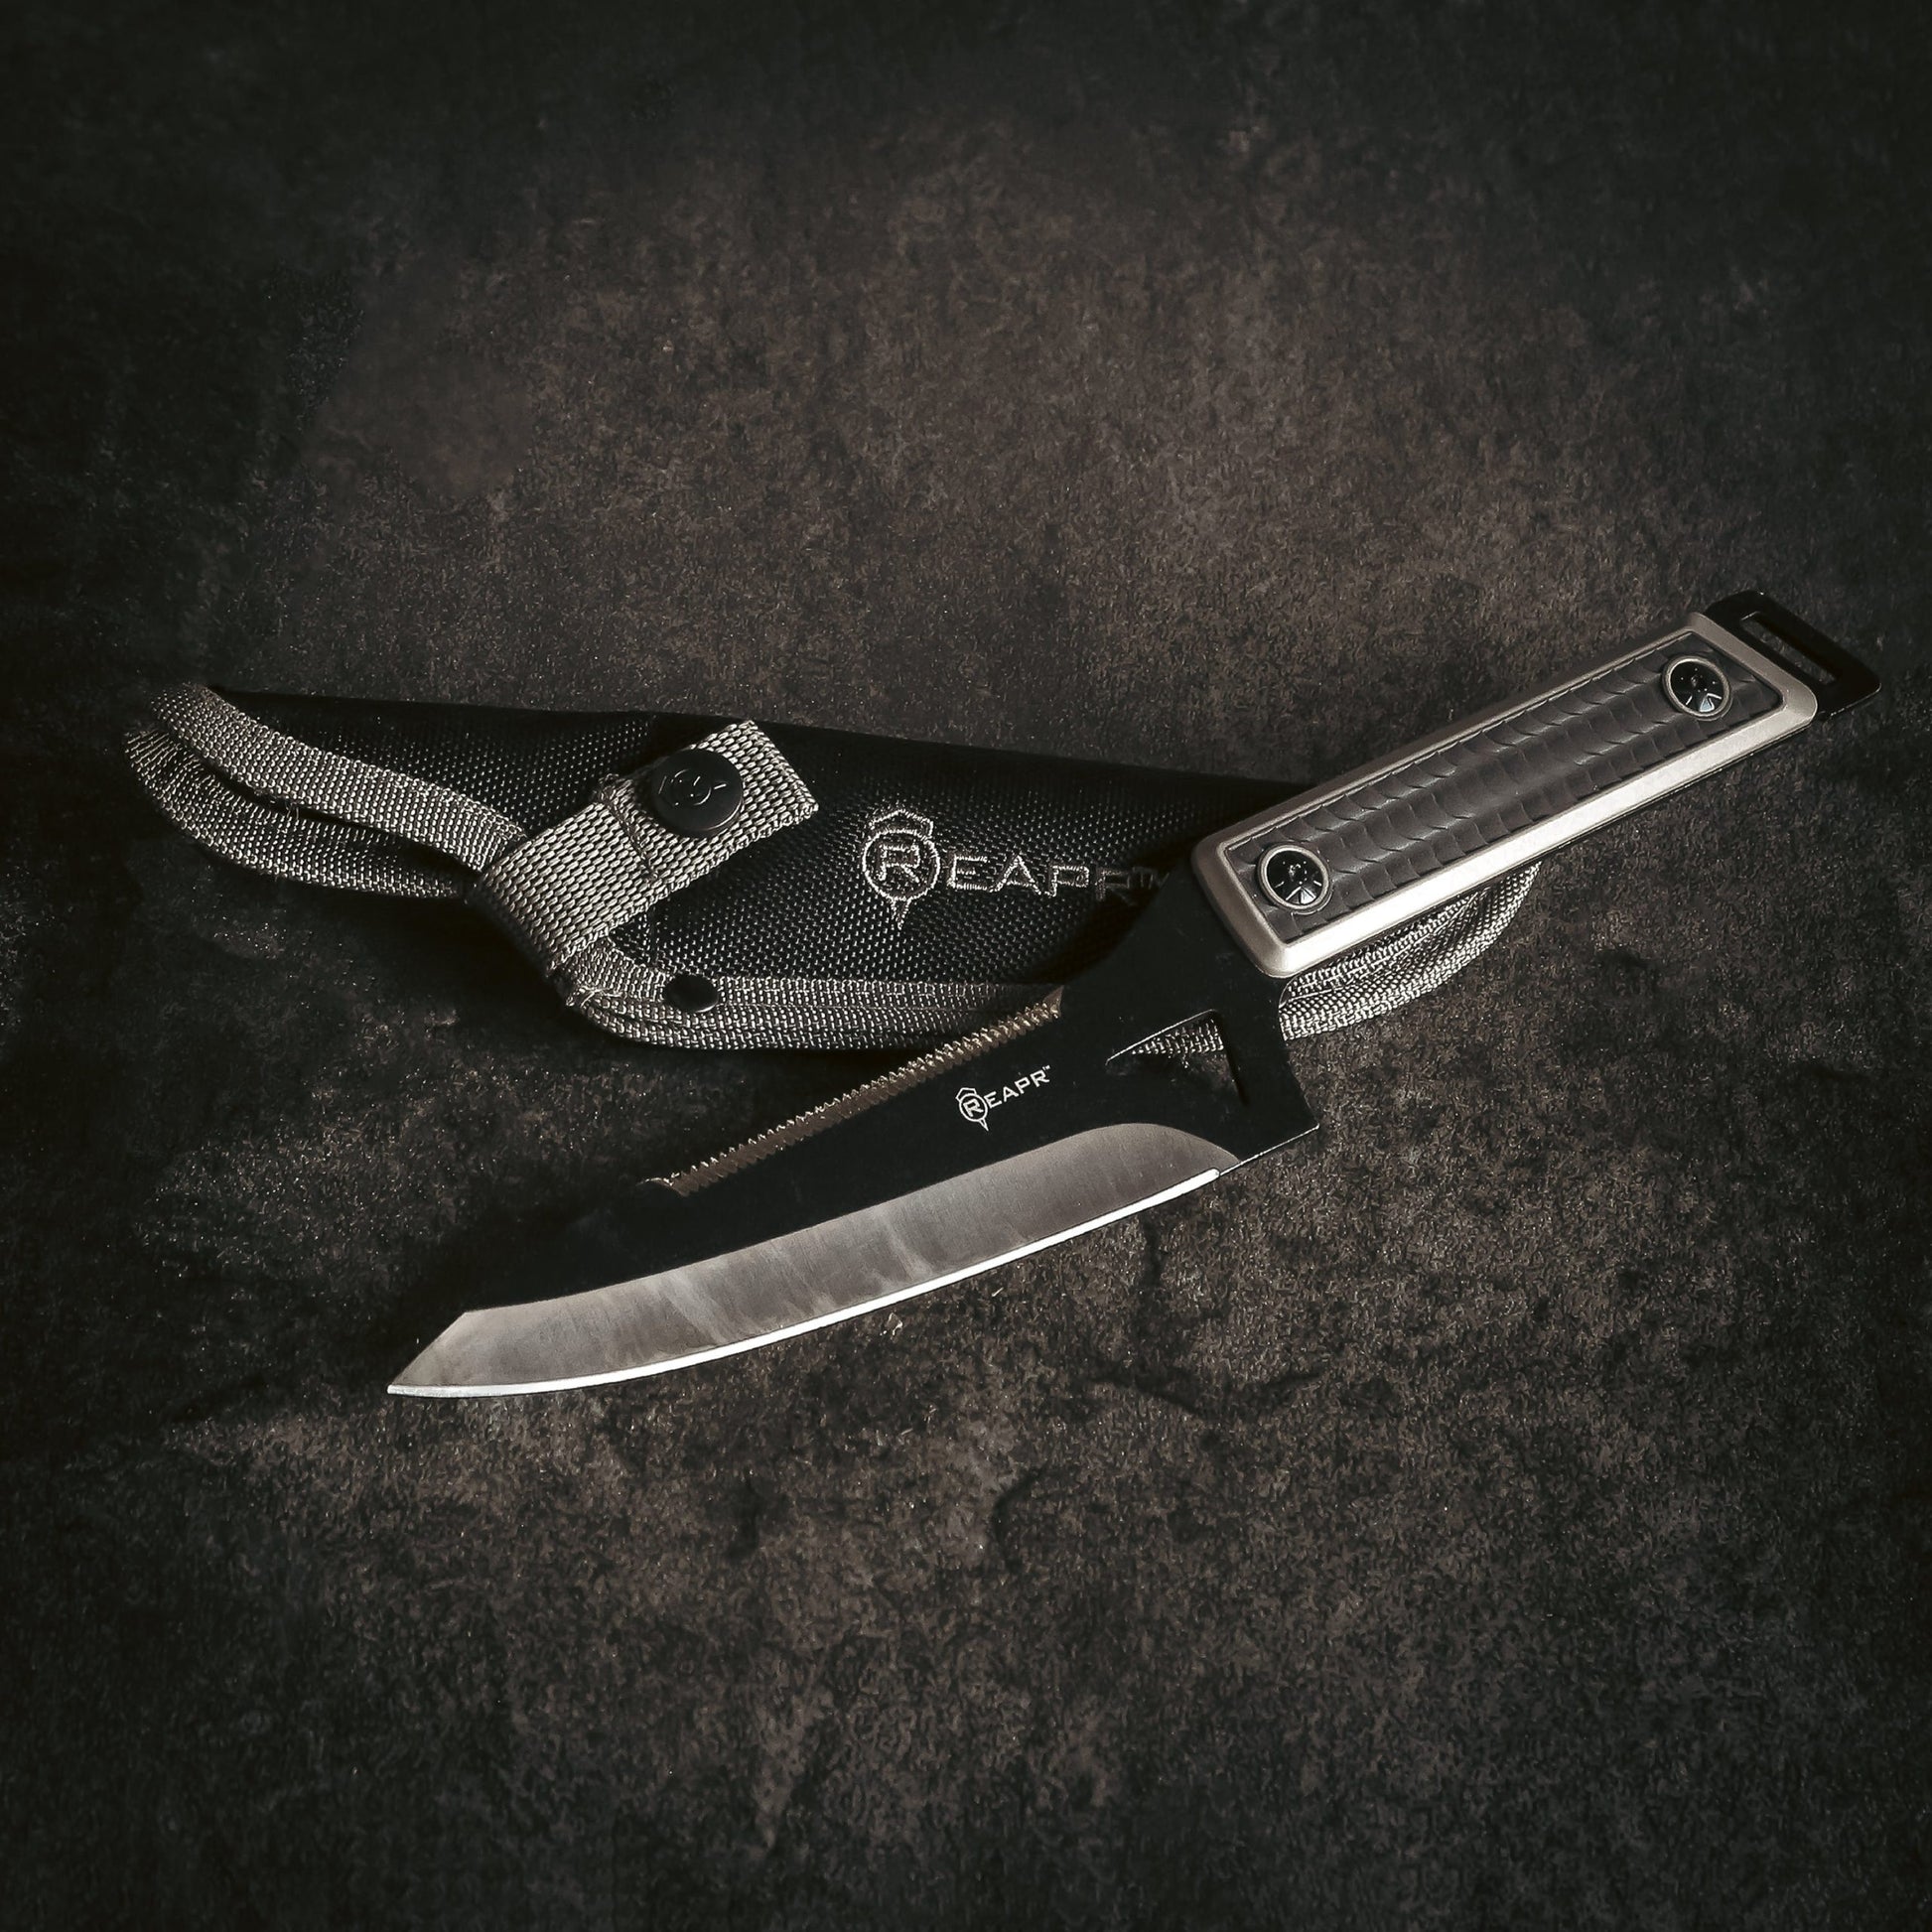 You get everything you need with the Reapr Versa Camp Knife. Born in the kitchen but raised in the wild, it’s tough, durable, and versatile. Whatever your campsite cutting needs, this knife can handle it. www.defenceqstore.com.au